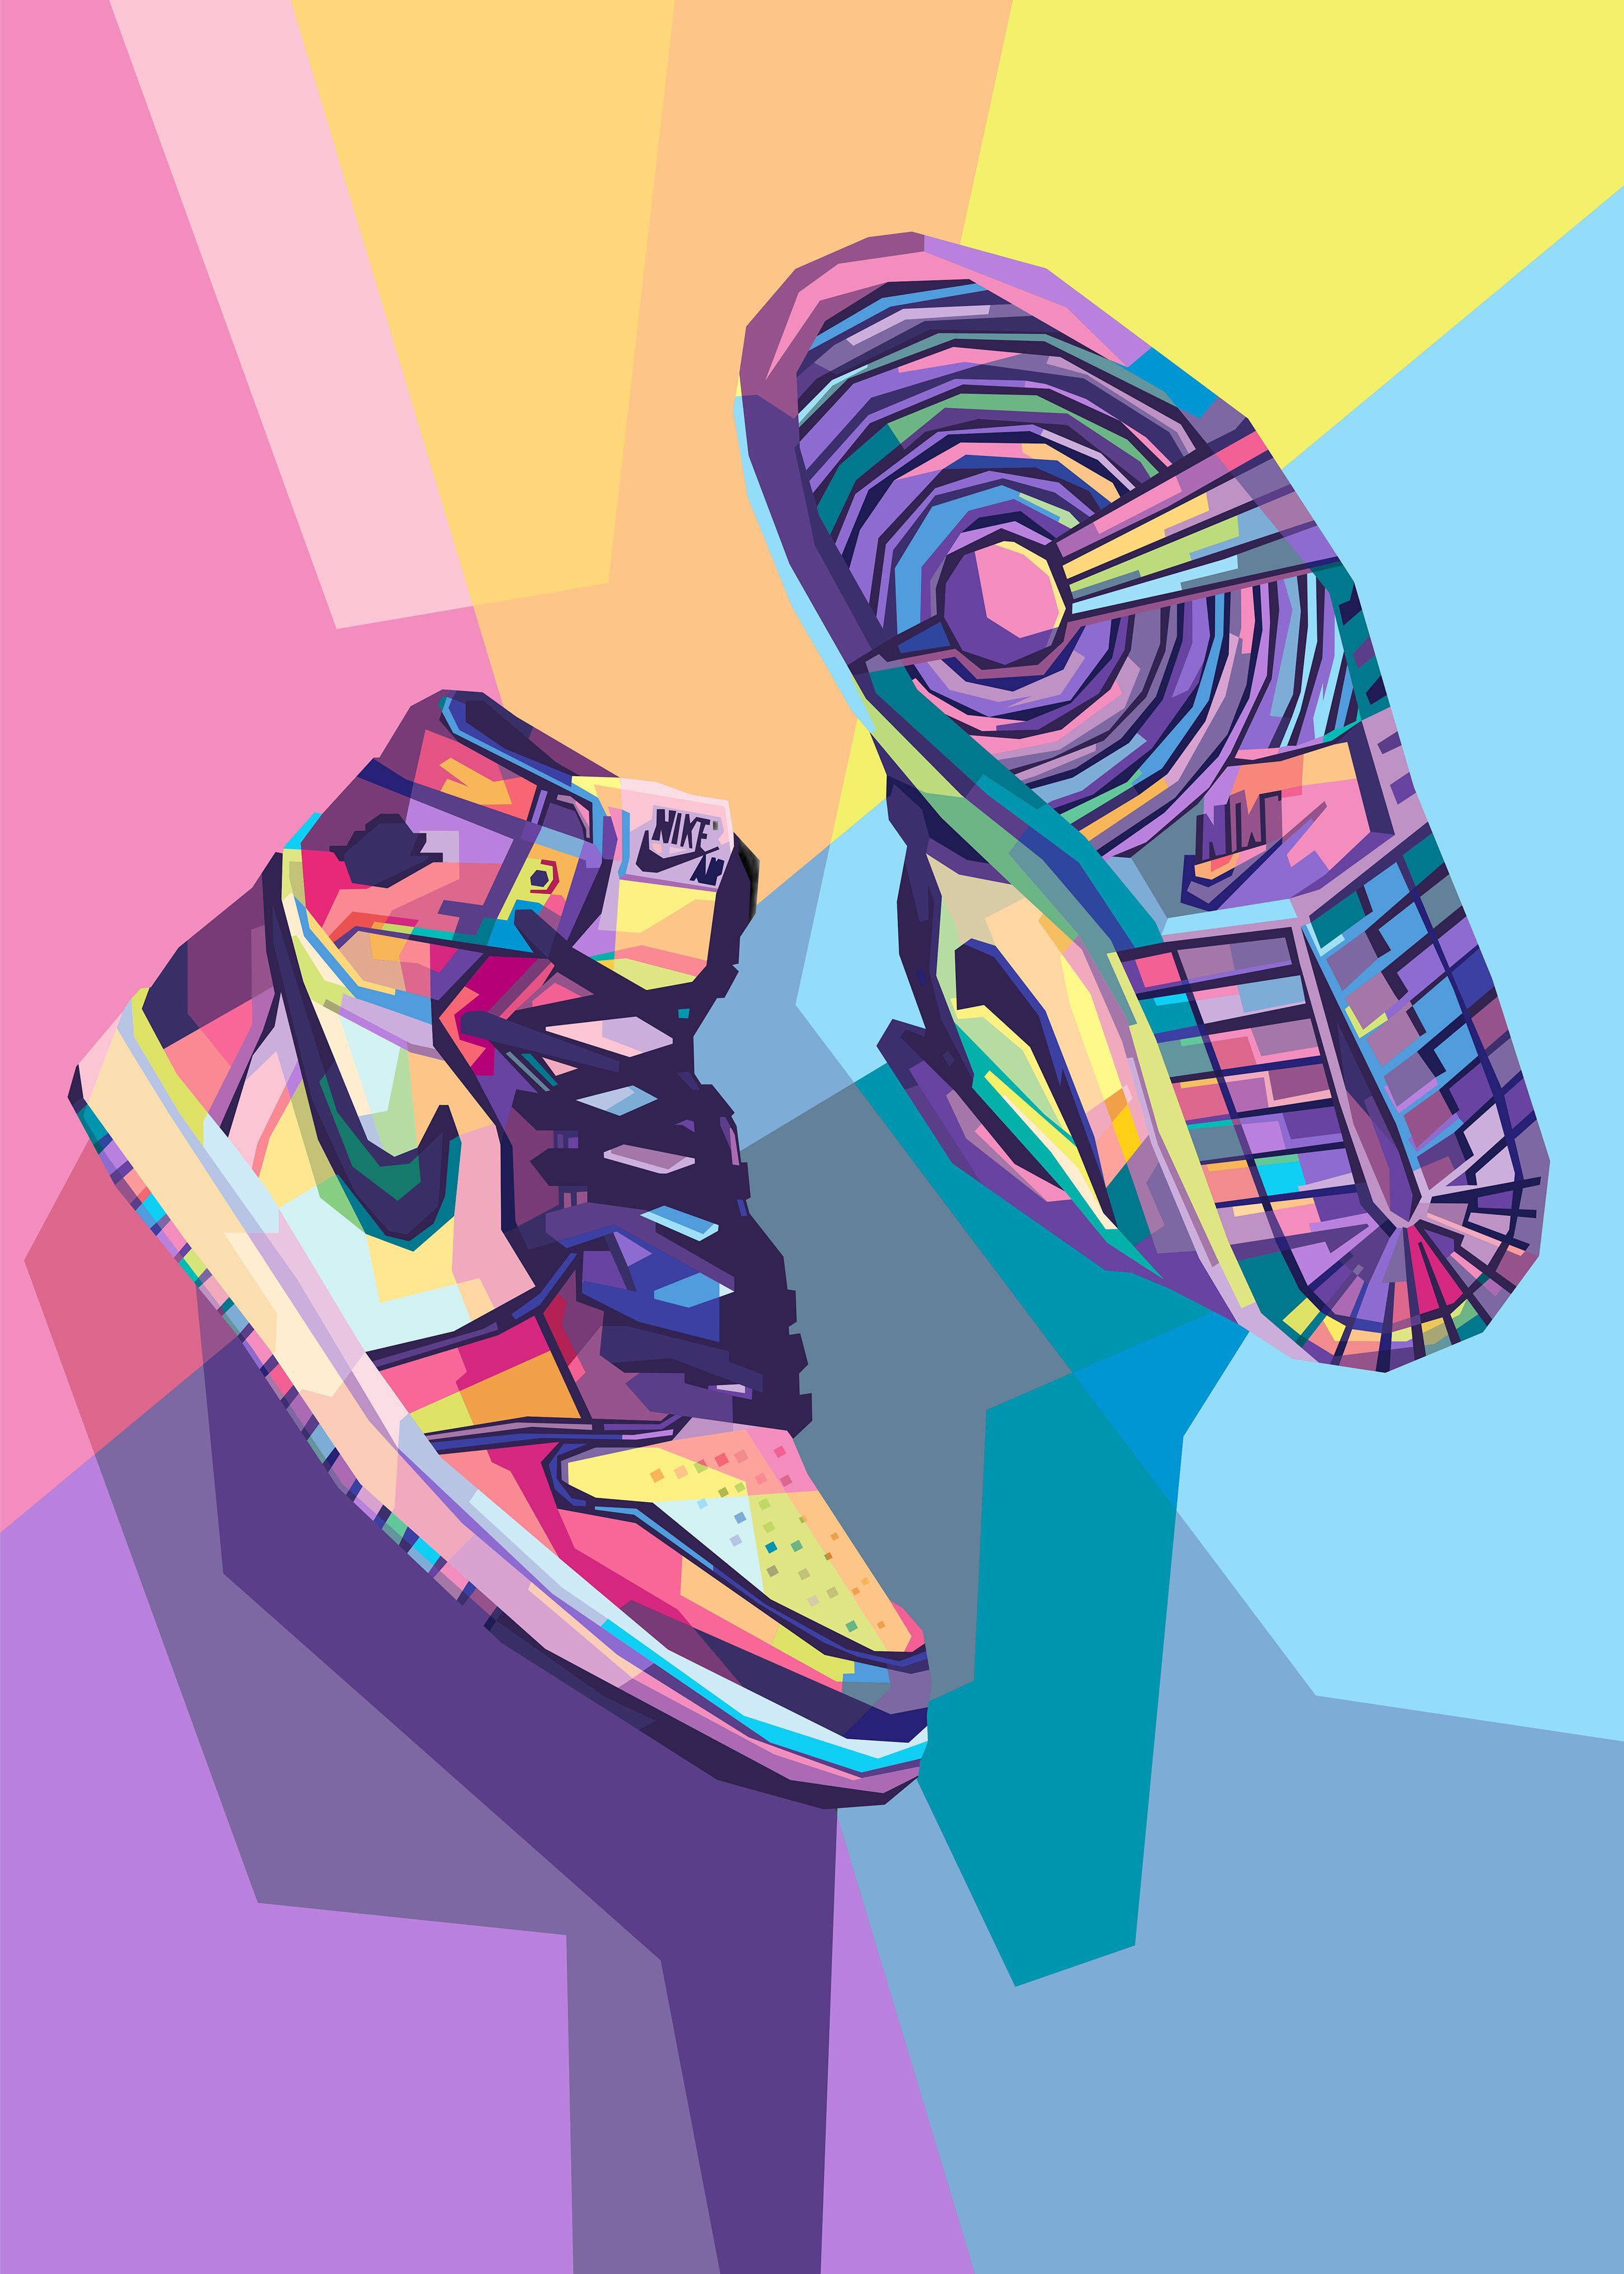 A pair of colorful shoes on top - Shoes, Nike